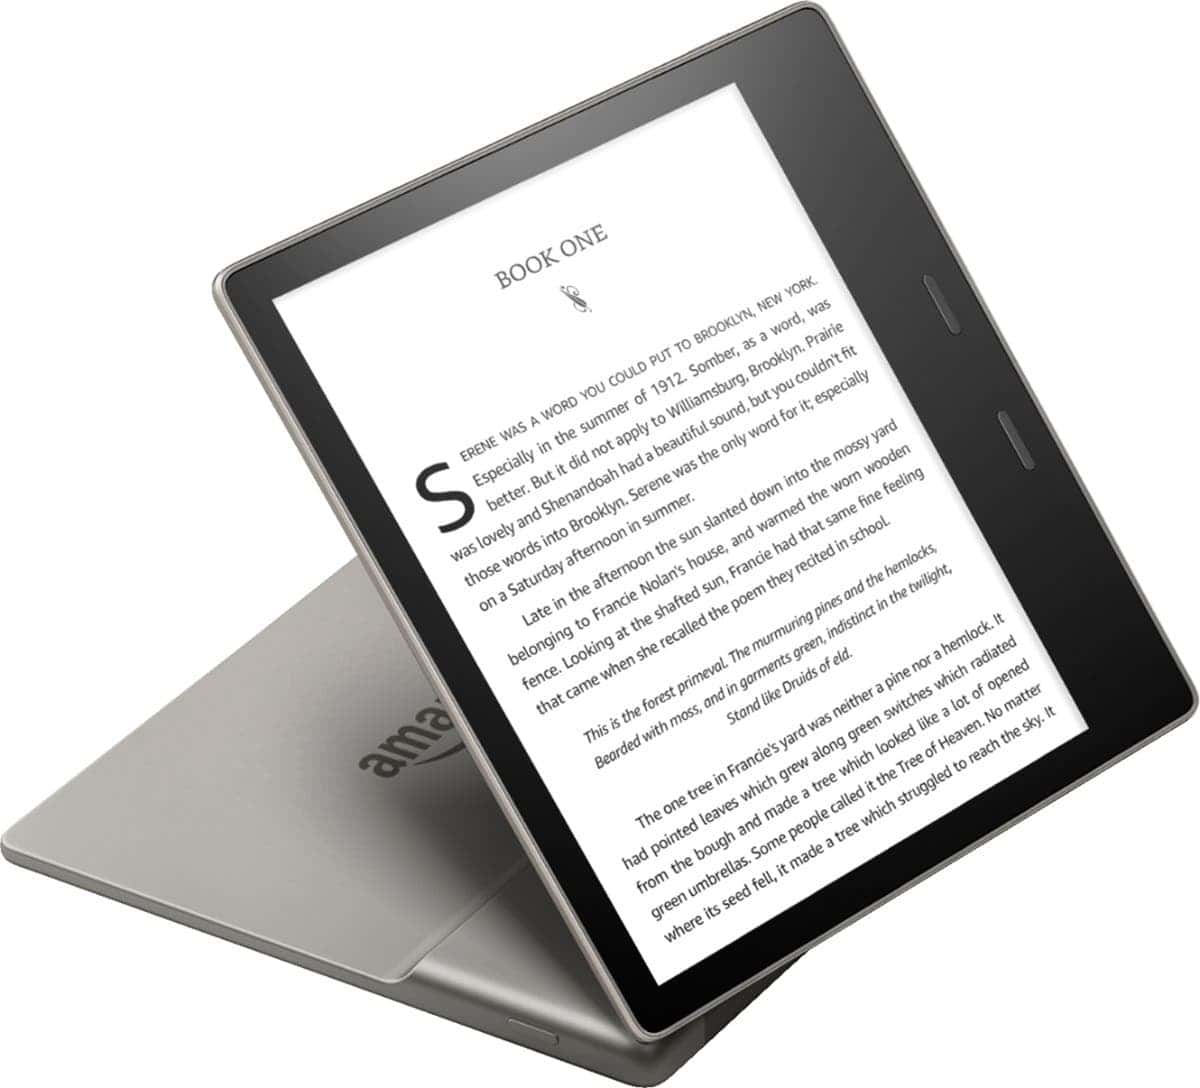 Vivlio InkPad 4 comes with a 7.8-inch E Ink Carta 1200 display